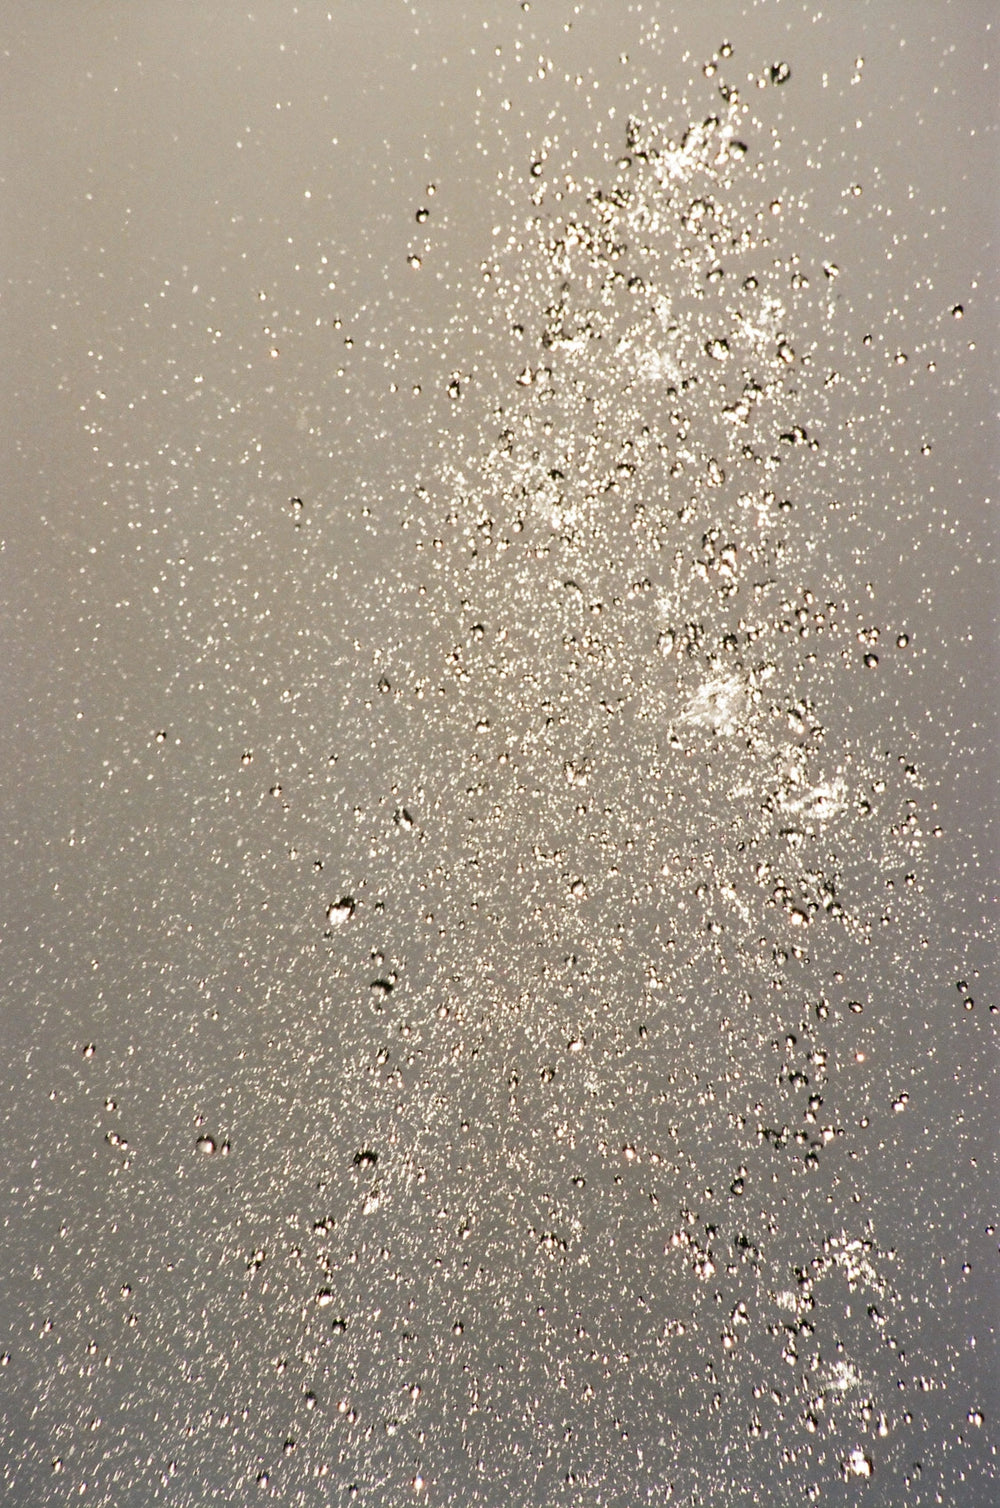 a photo of water droplets from Lina Scheynius’ photo-essay for Tabayer Jewelry